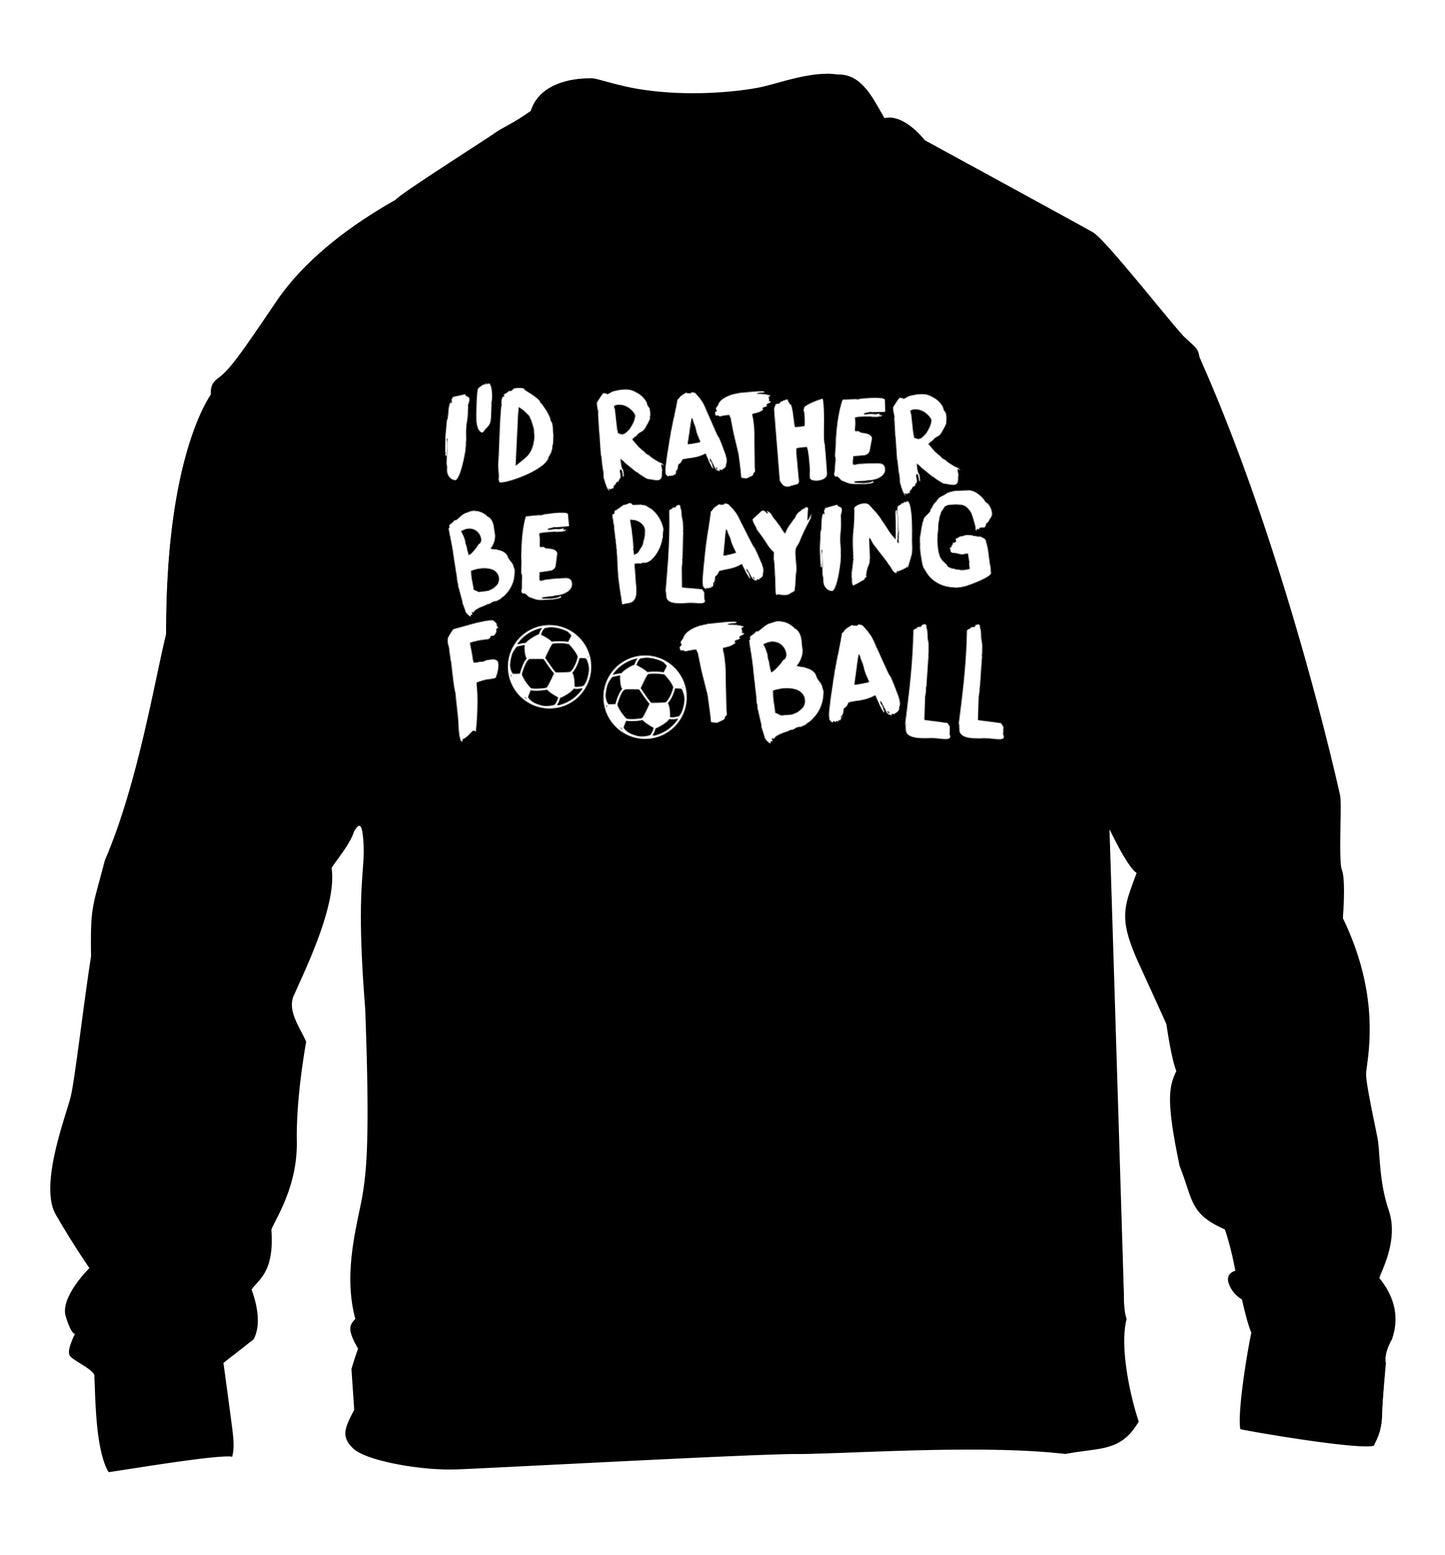 I'd rather be playing football children's black sweater 12-14 Years